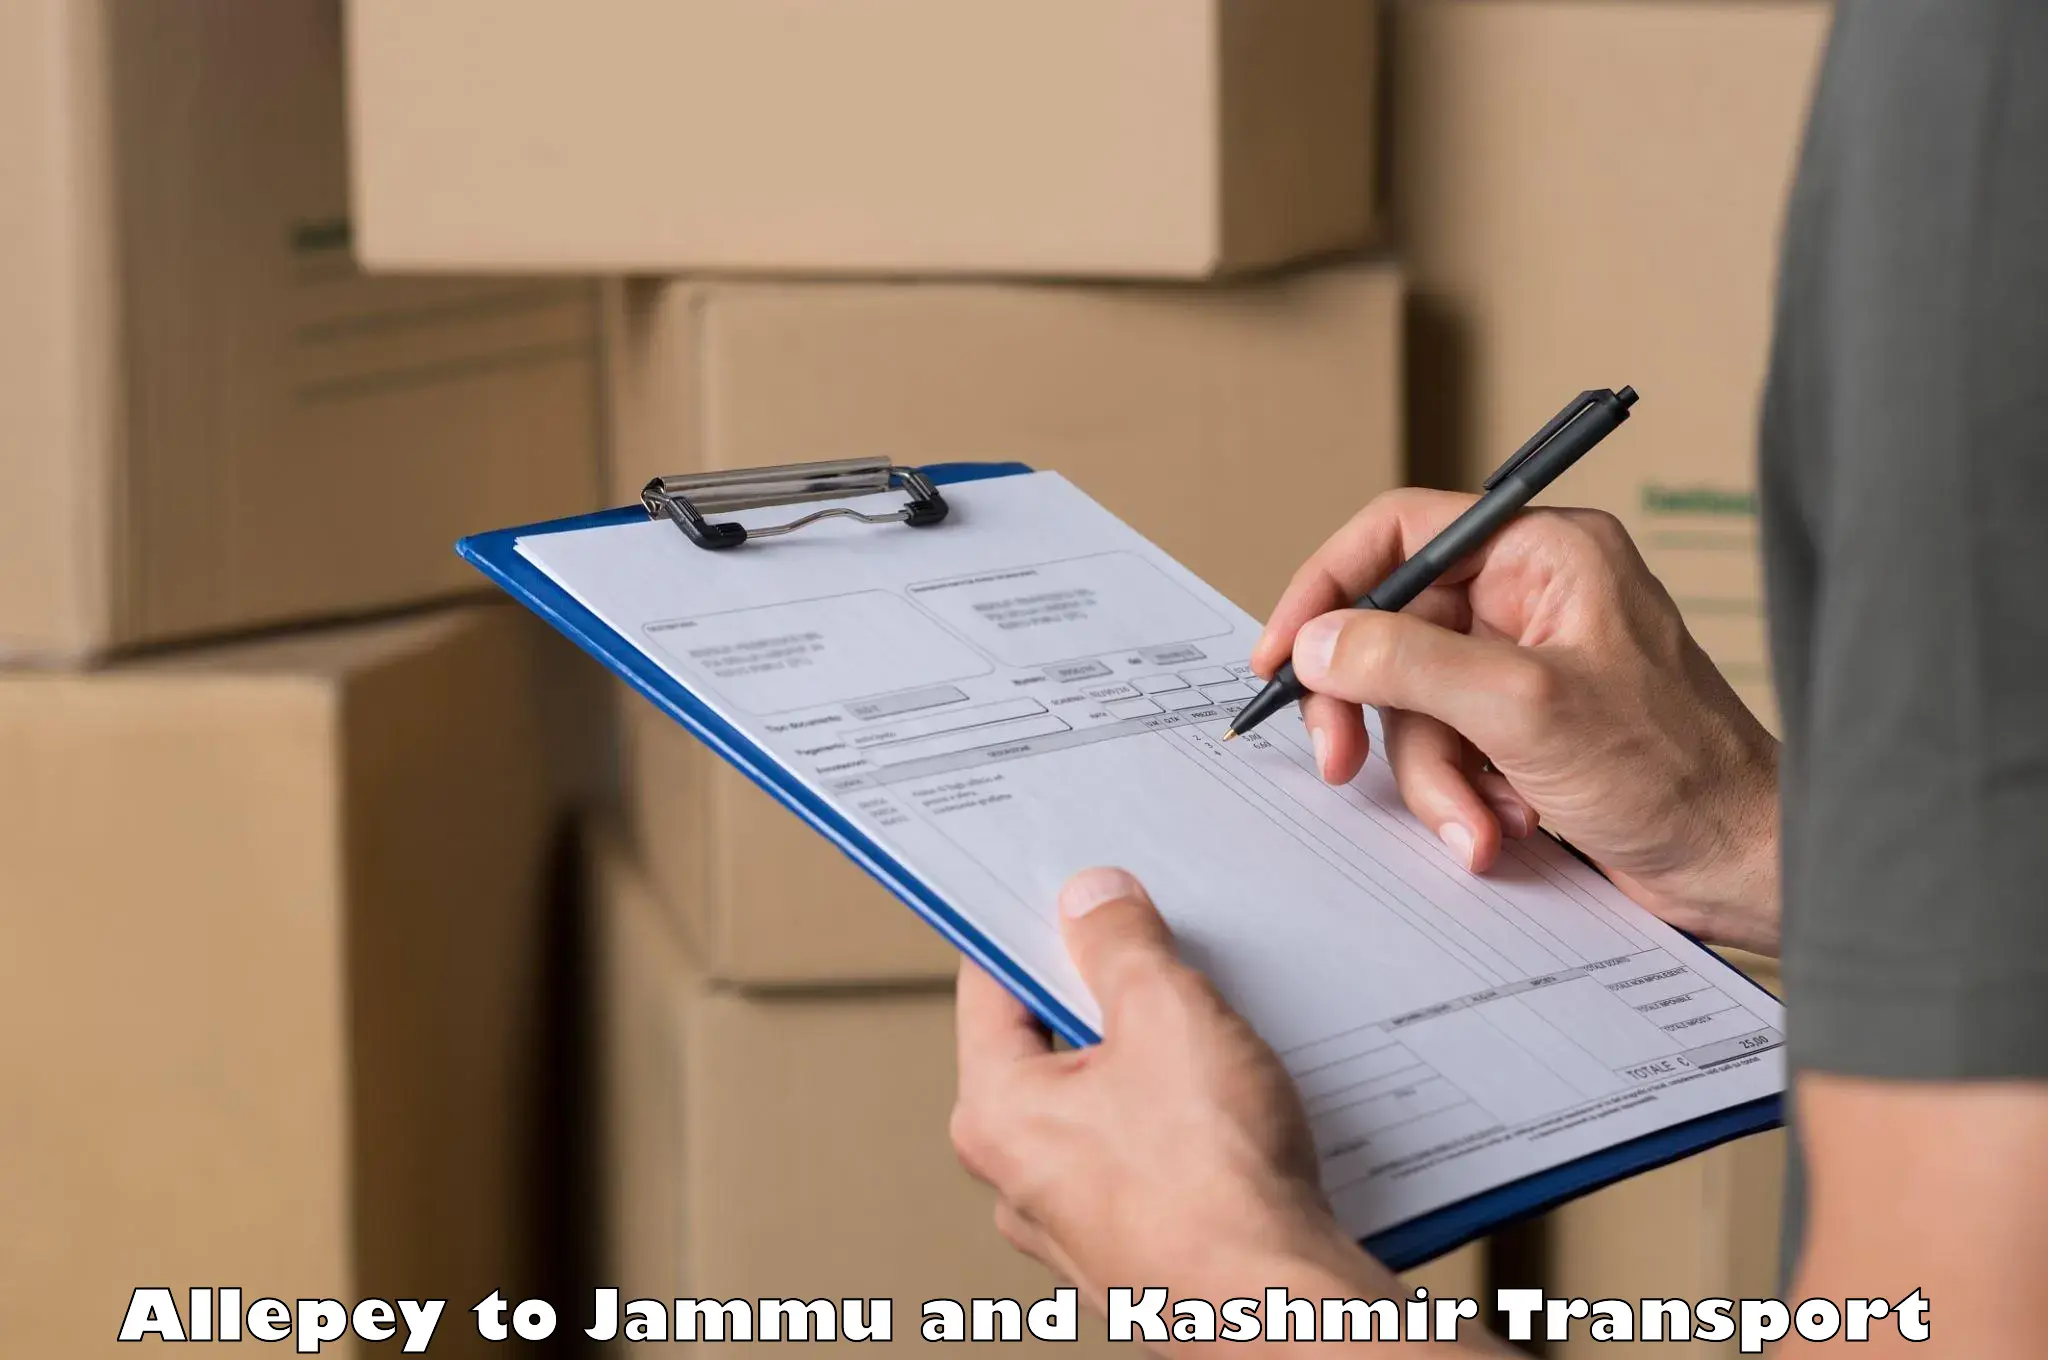 Air freight transport services in Allepey to Shopian